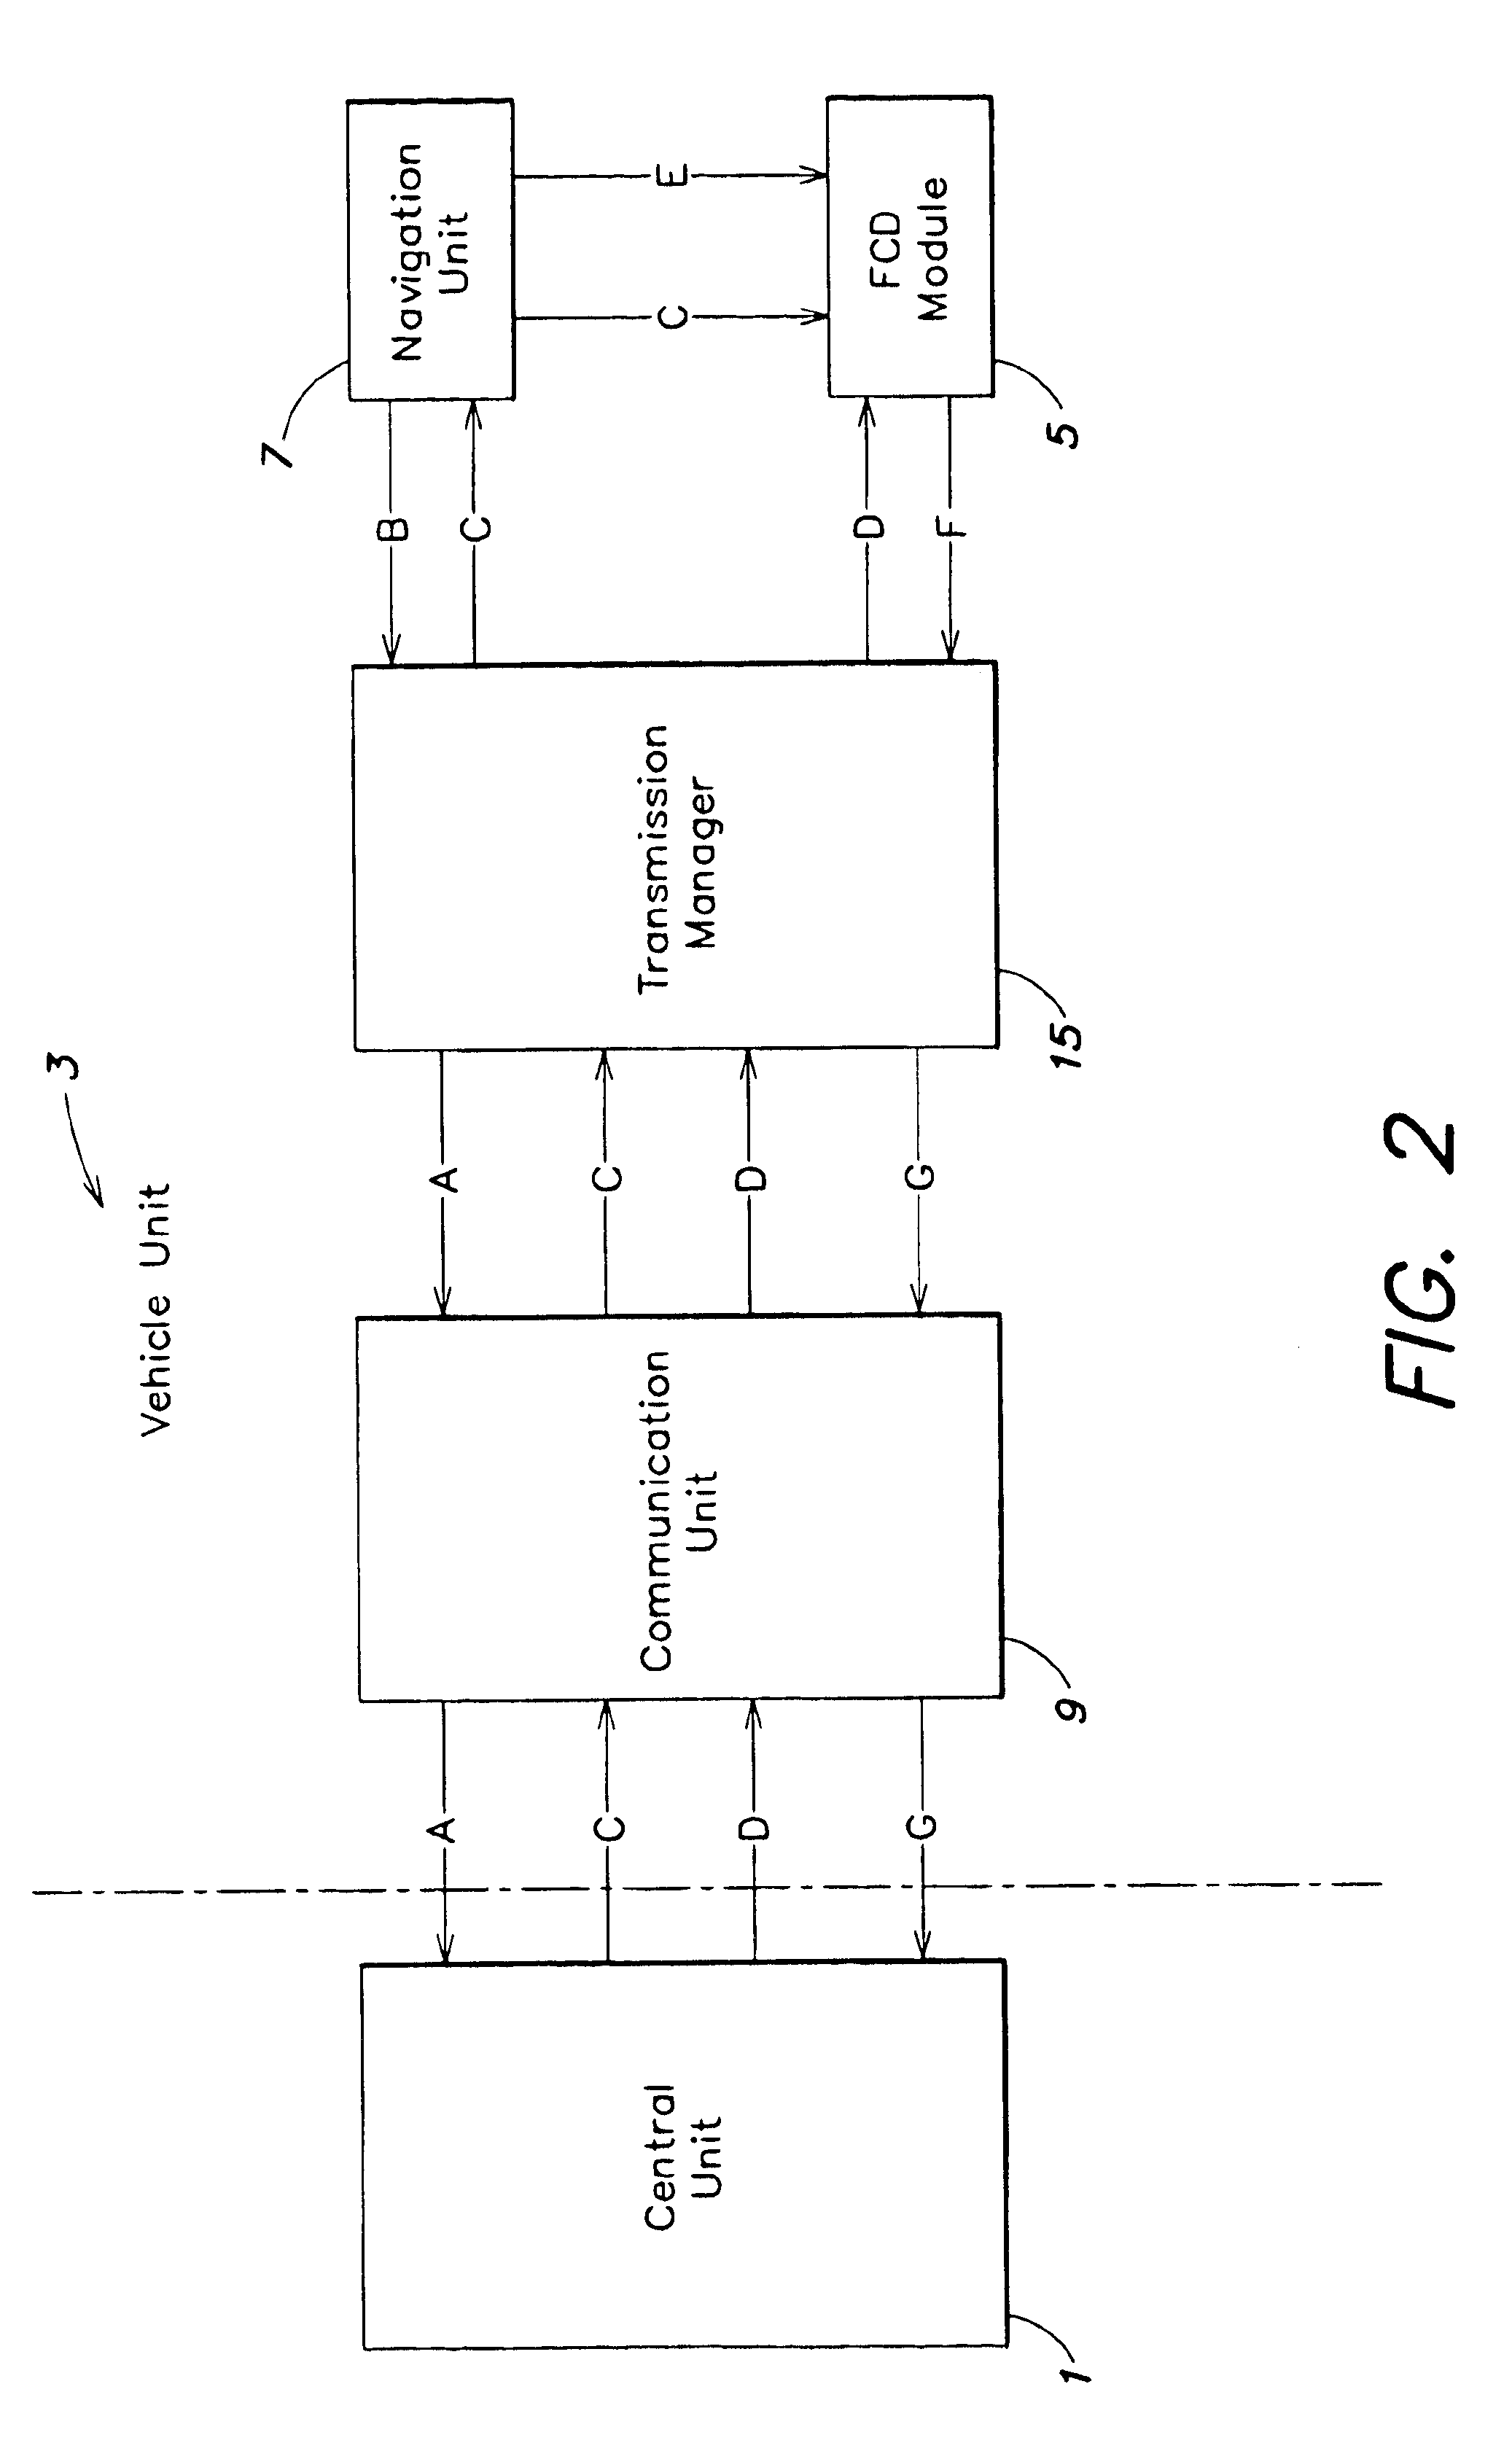 Motor vehicle navigation system that receives route information from a central unit